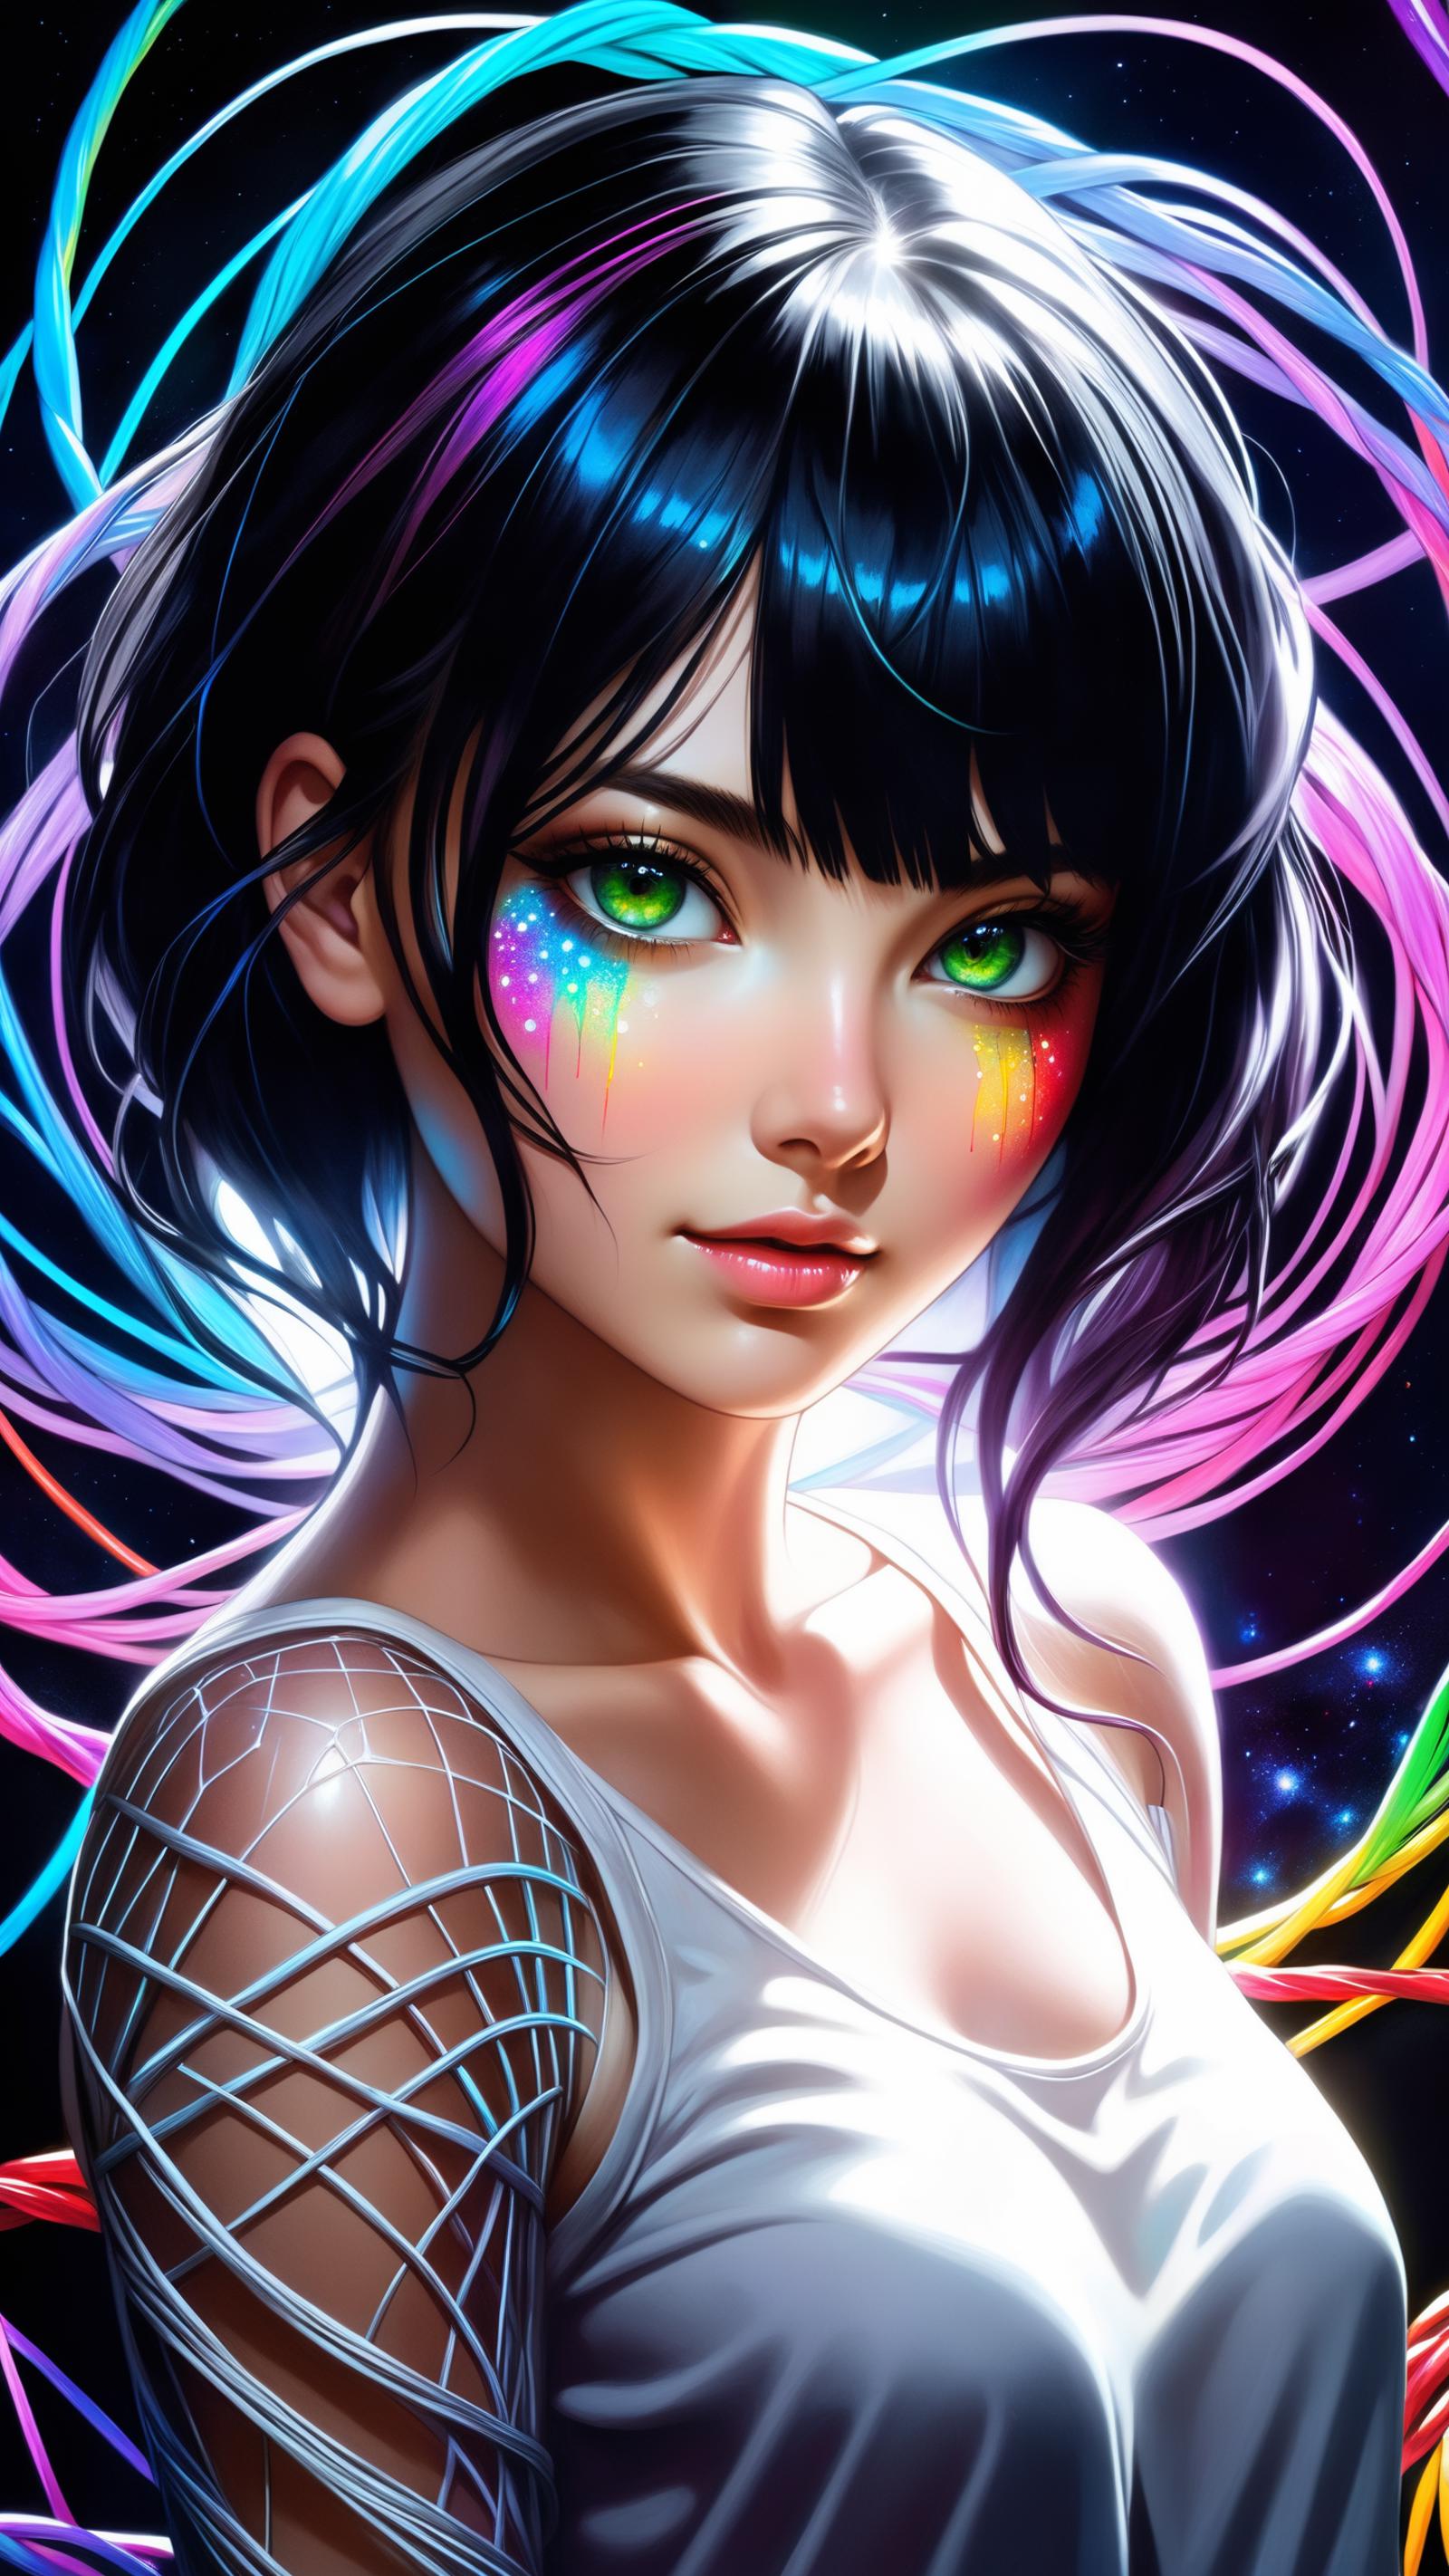 A colorful digital painting of a woman with green eyes, painted with vibrant colors and rainbow makeup.